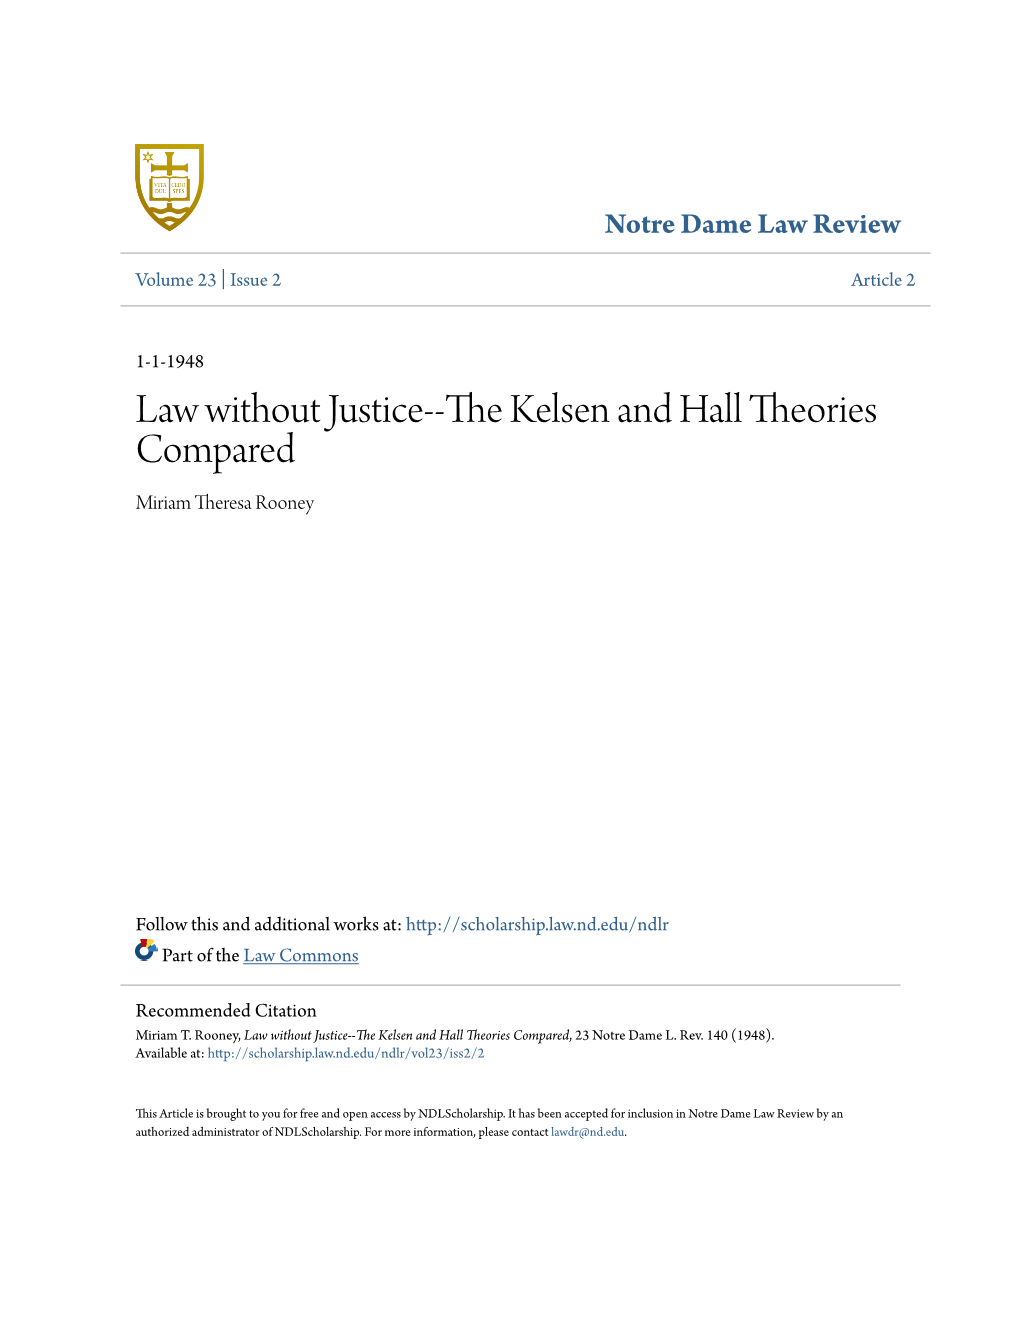 Law Without Justice--The Kelsen and Hall Theories Compared Miriam Theresa Rooney